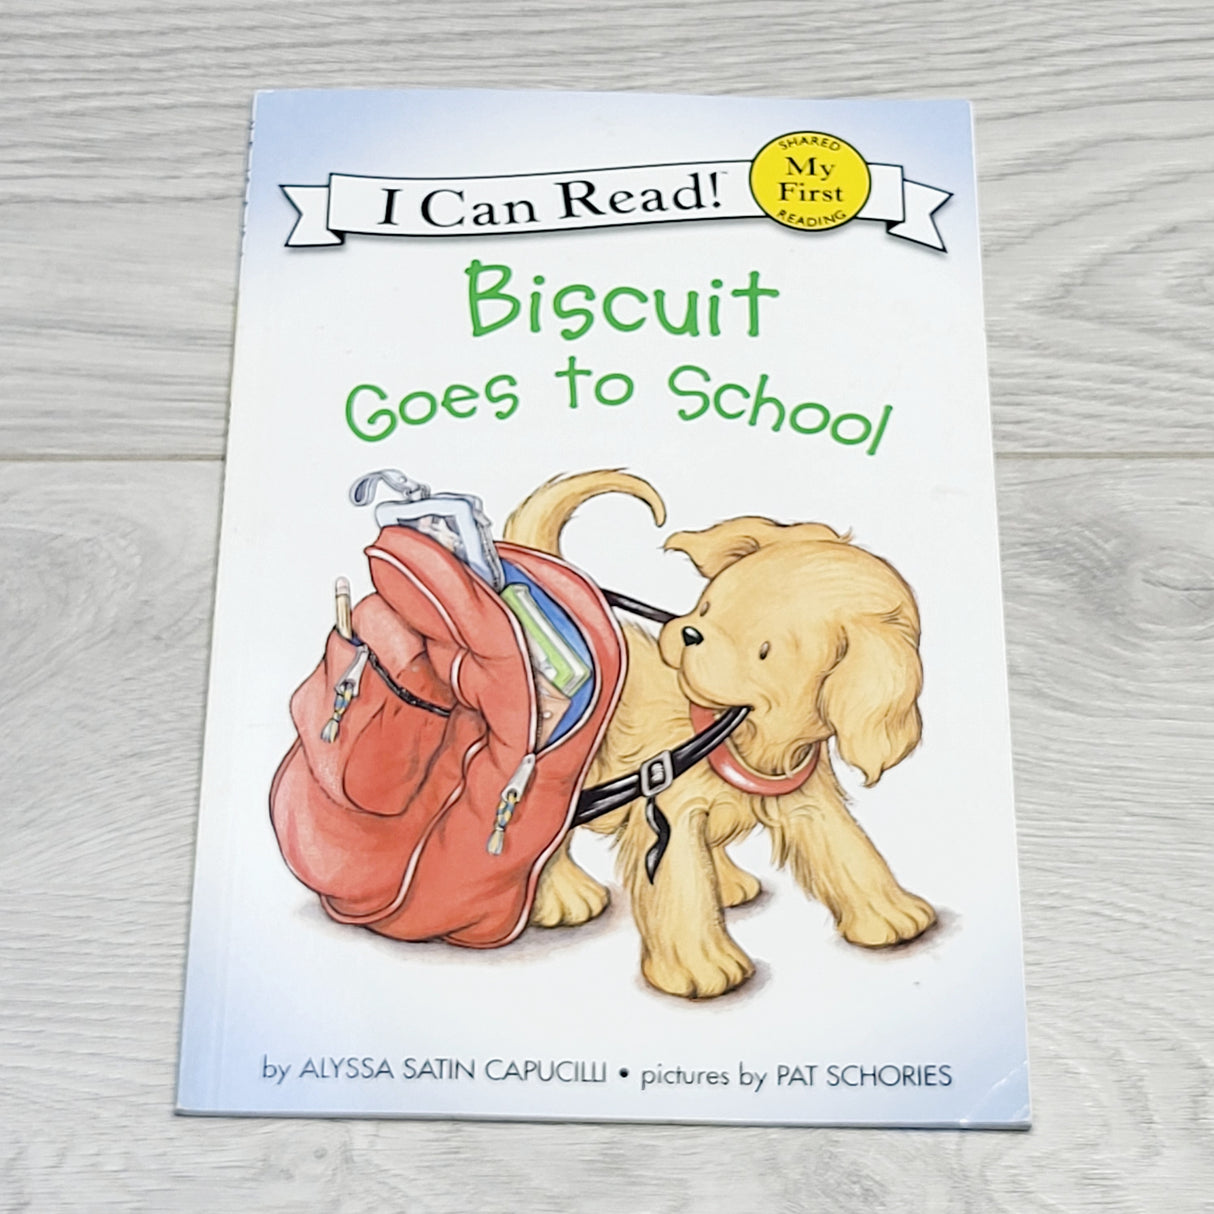 SPLT1 - Biscuit Goes to School. Soft cover book